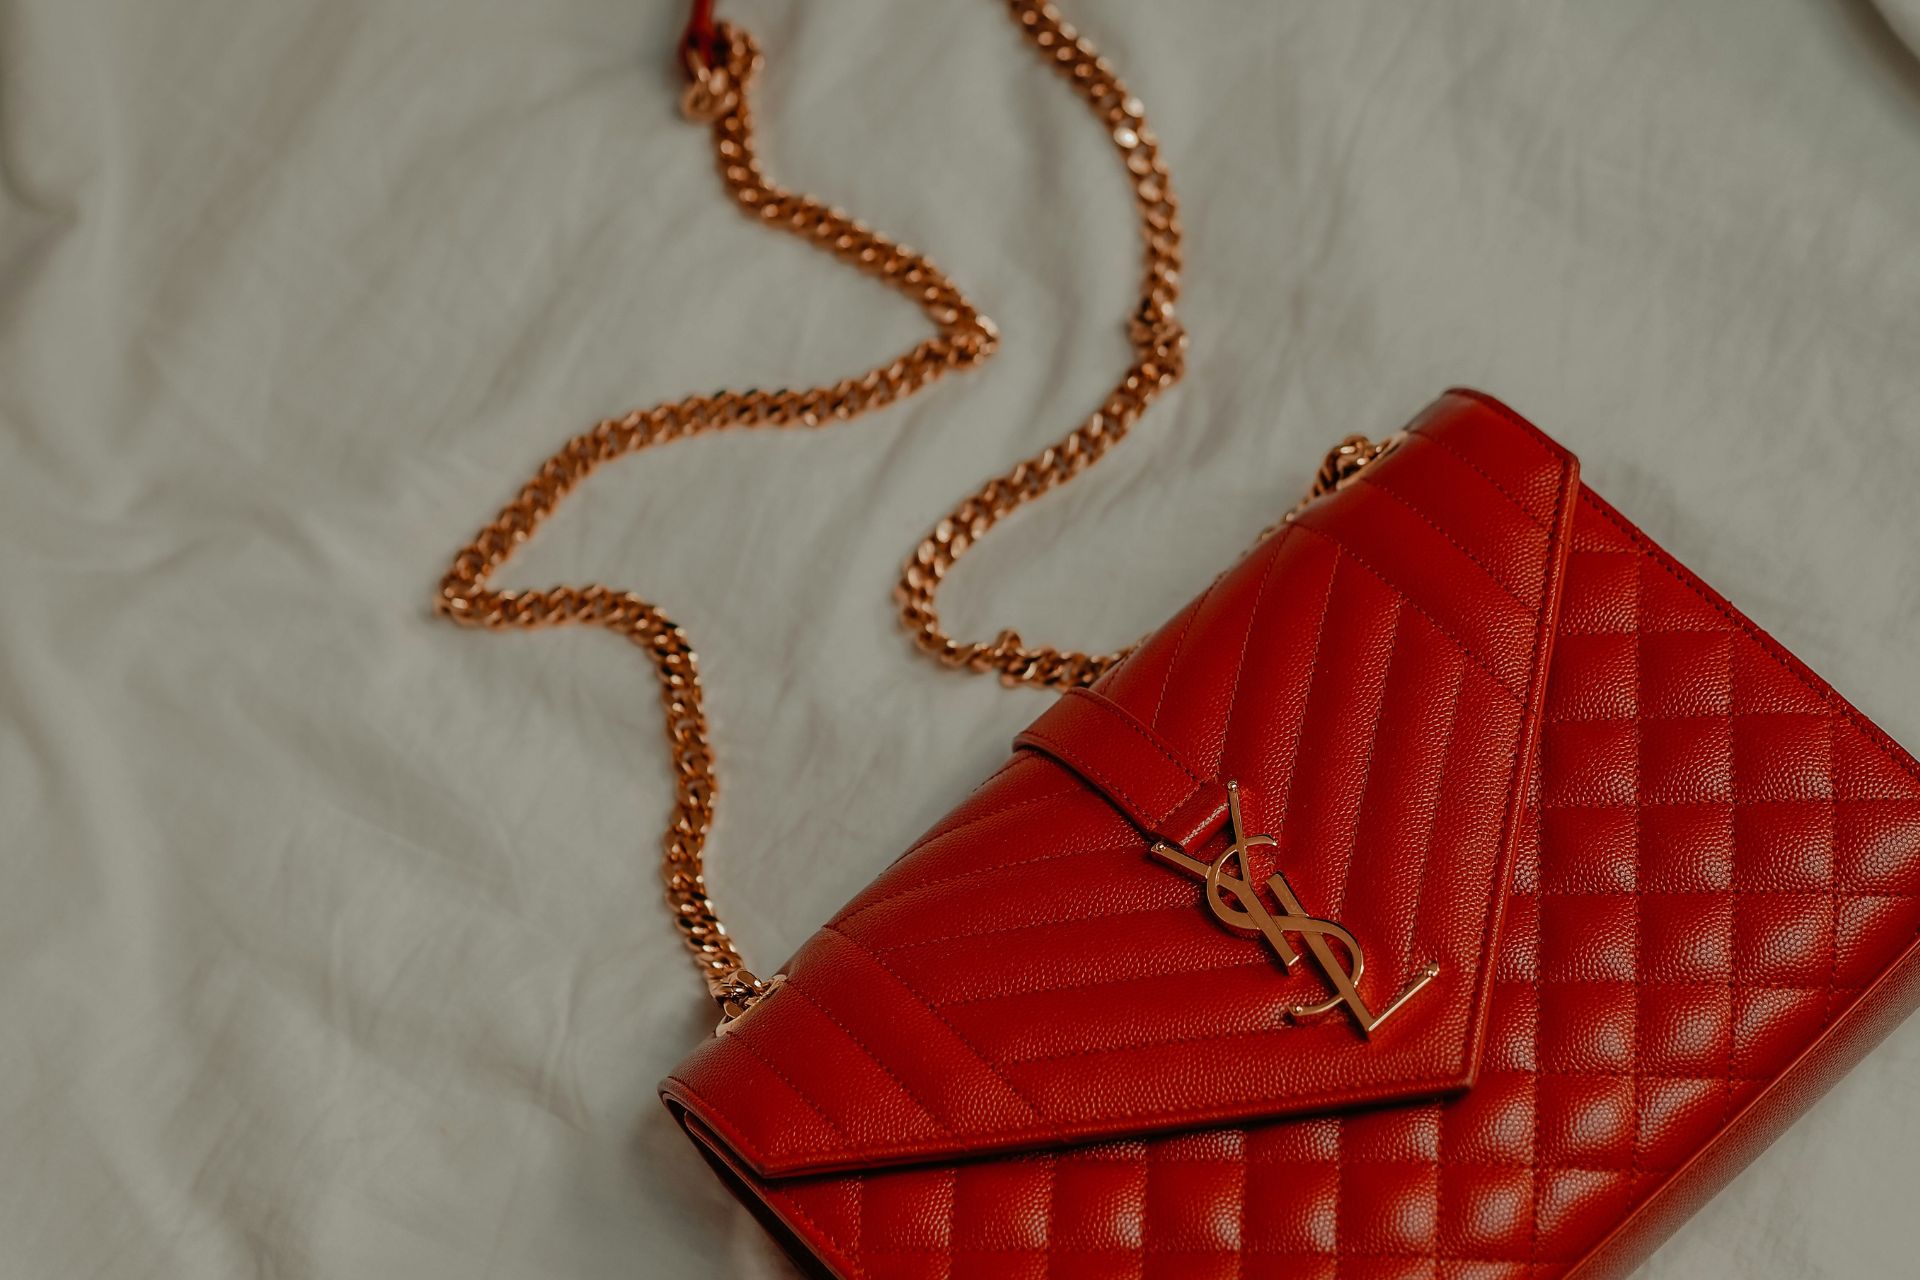 Red Accessories Are Trending (Yes, Still)